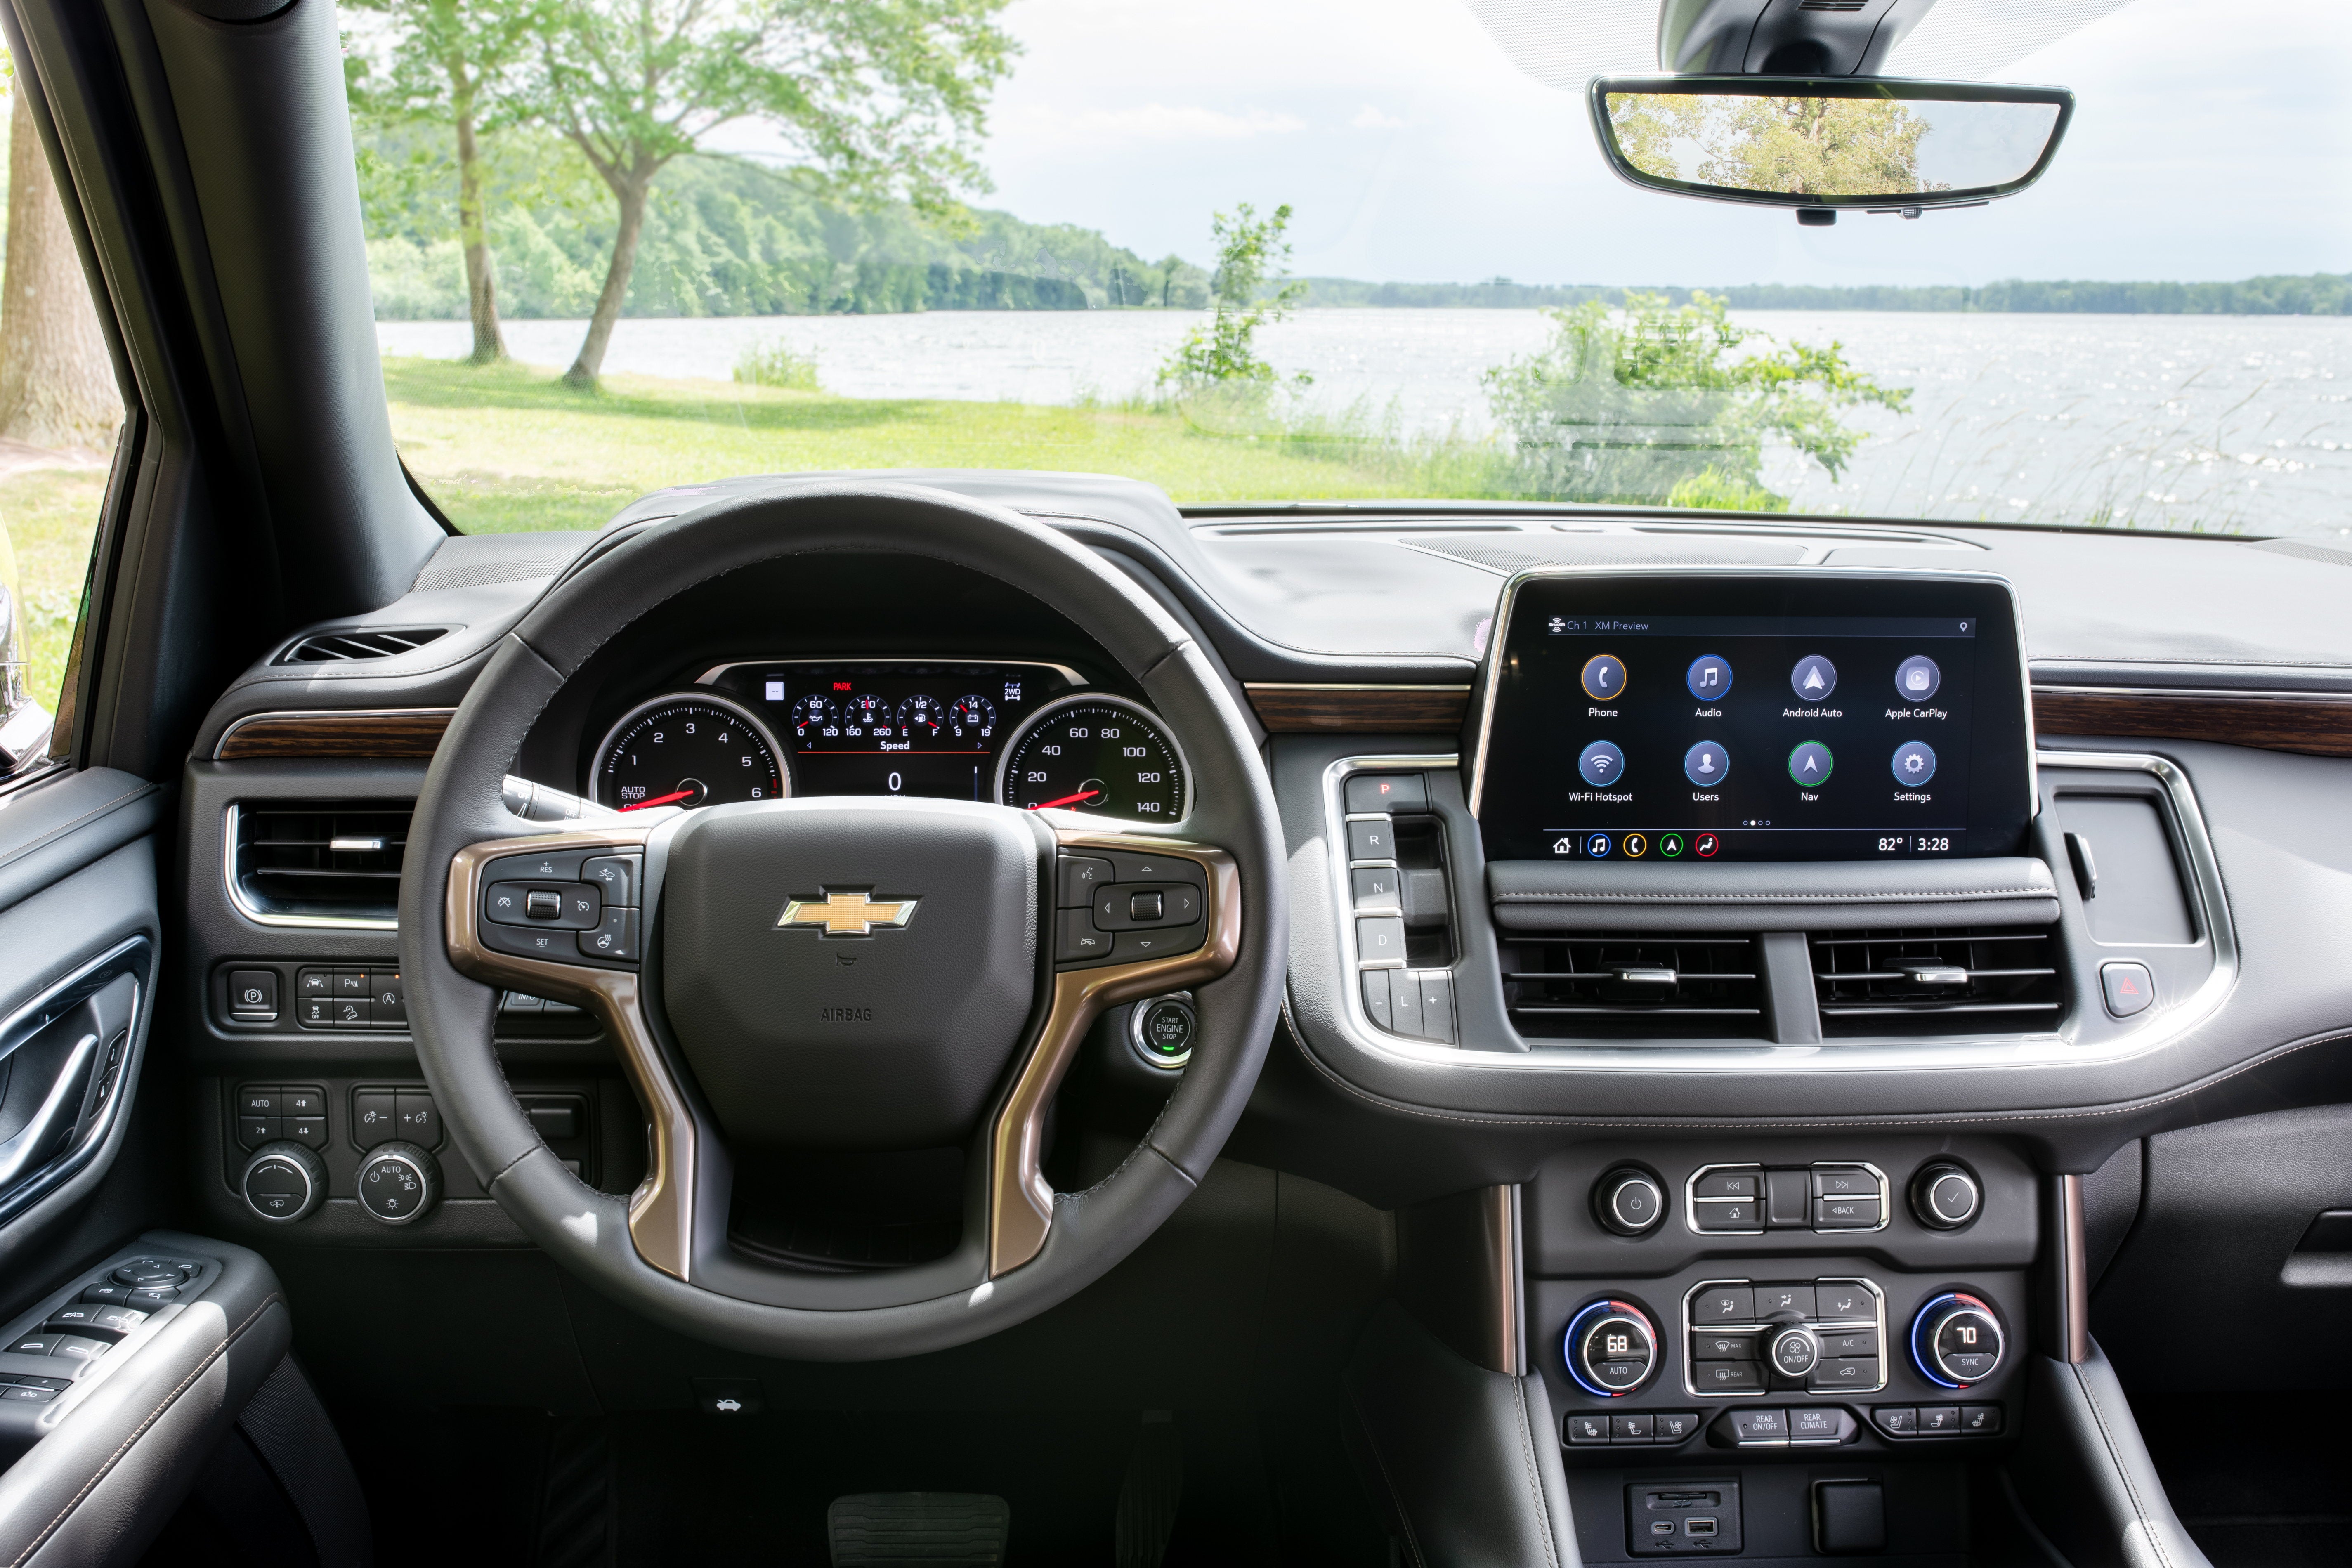 Technology in the 2021 Tahoe